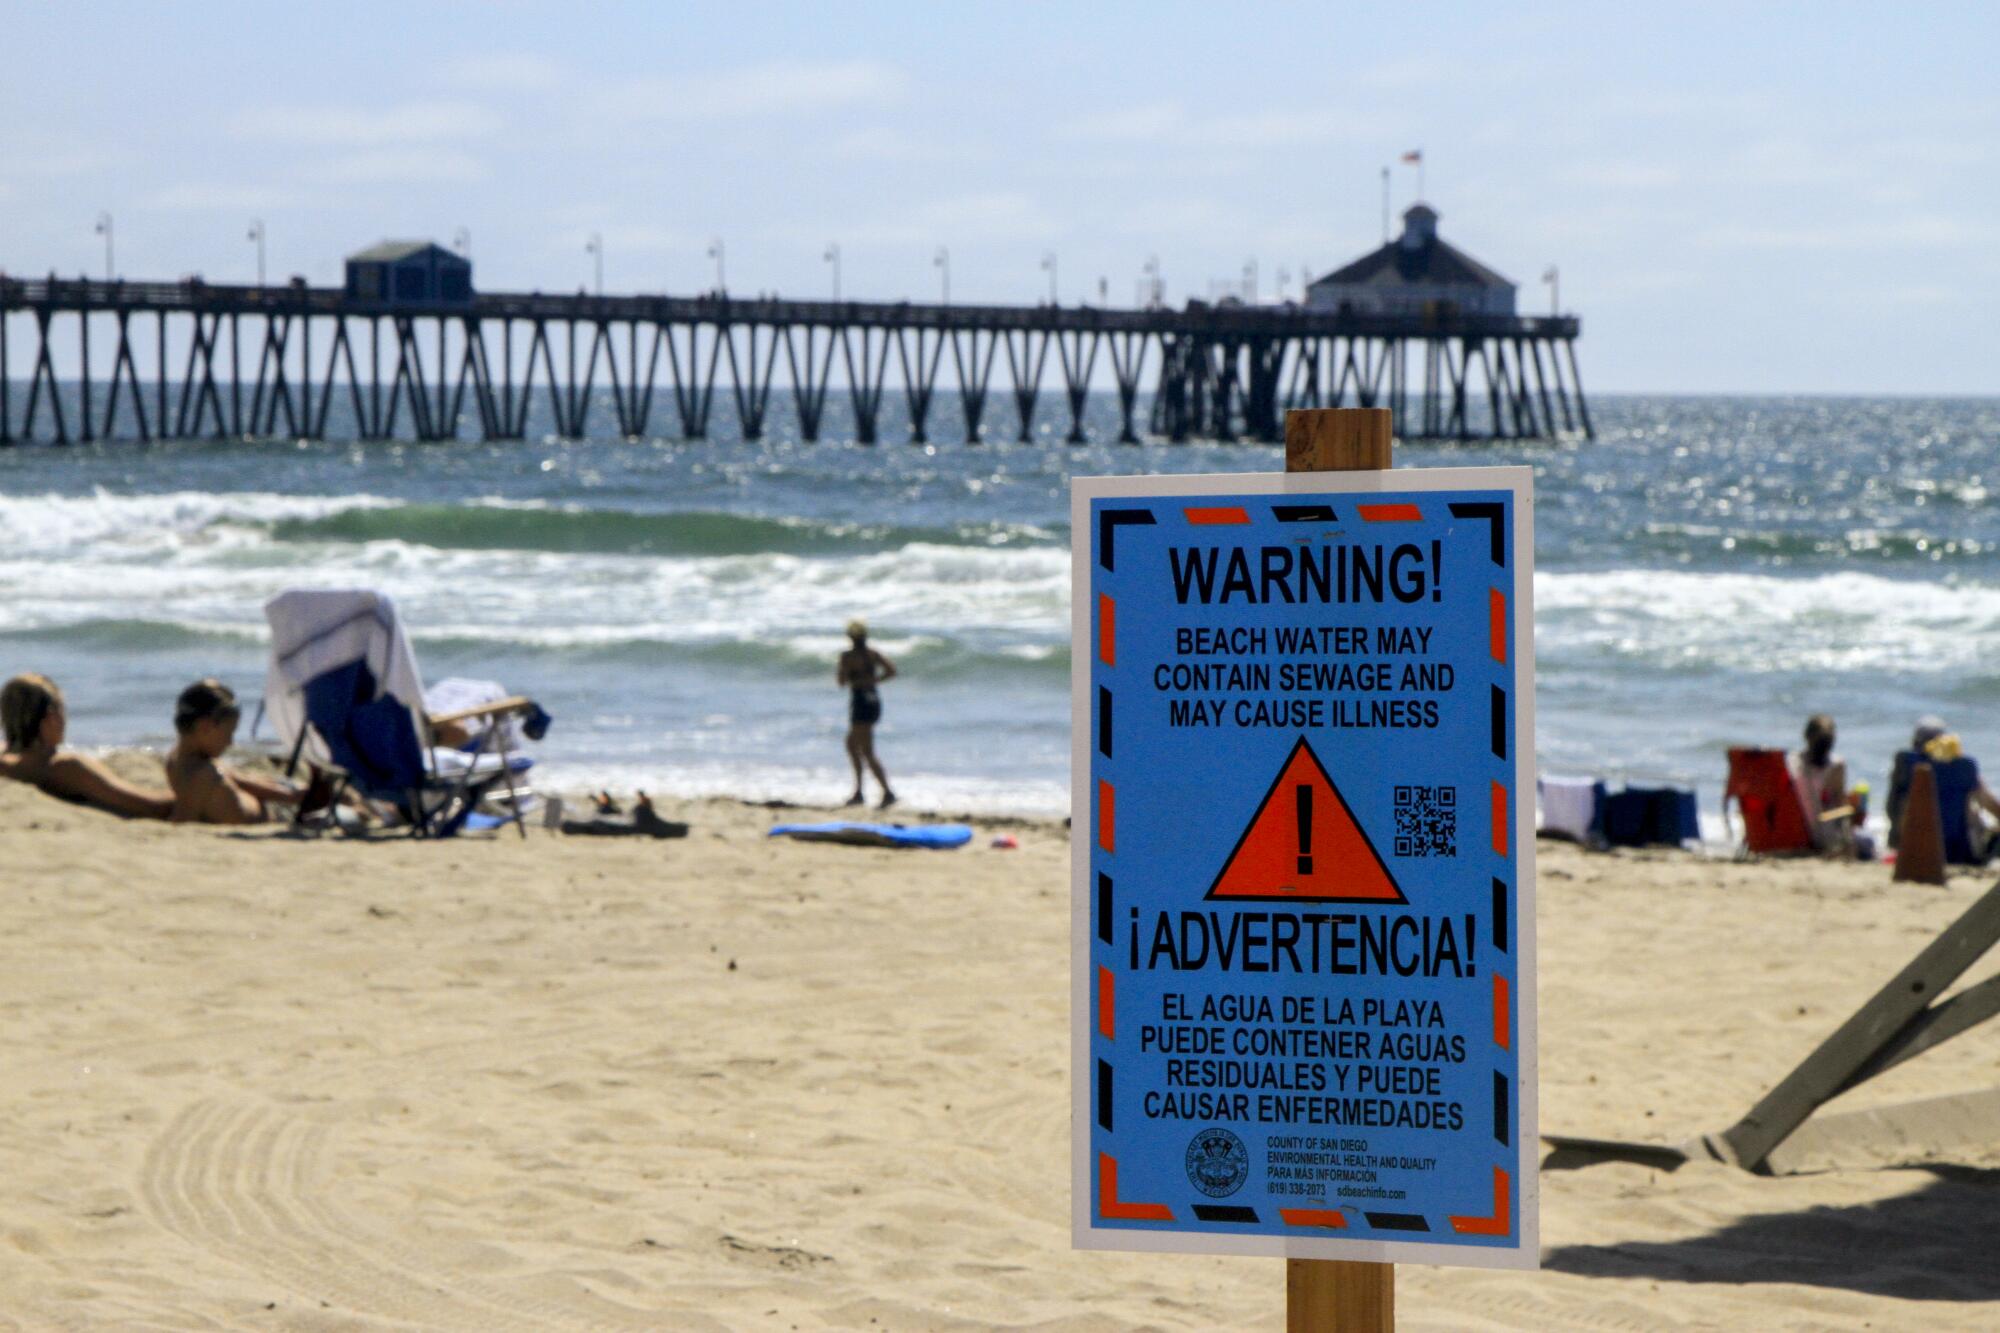 A sewage "warning" sign posted on a beach near a pier.